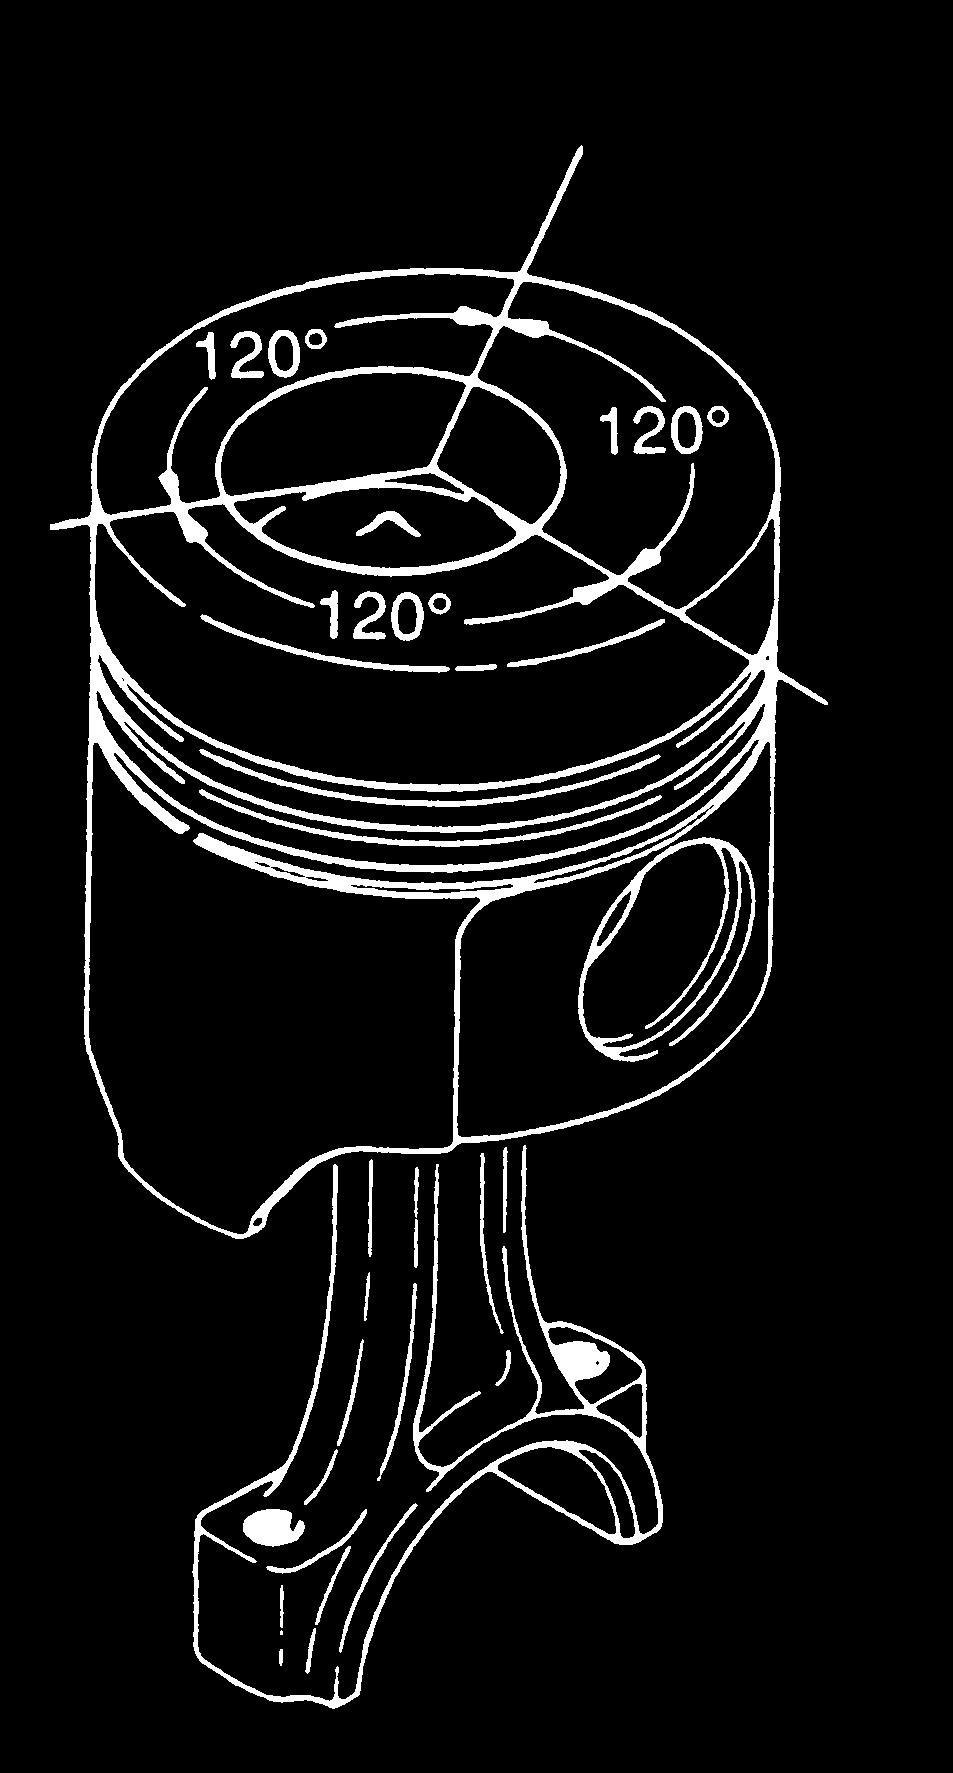 ENGINE Note: If installing new piston rings the end gap must be checked and adjusted as necessary. See Inspection of Pistons, Piston Rings and Wrist Pin on page 6-80 for specifications.